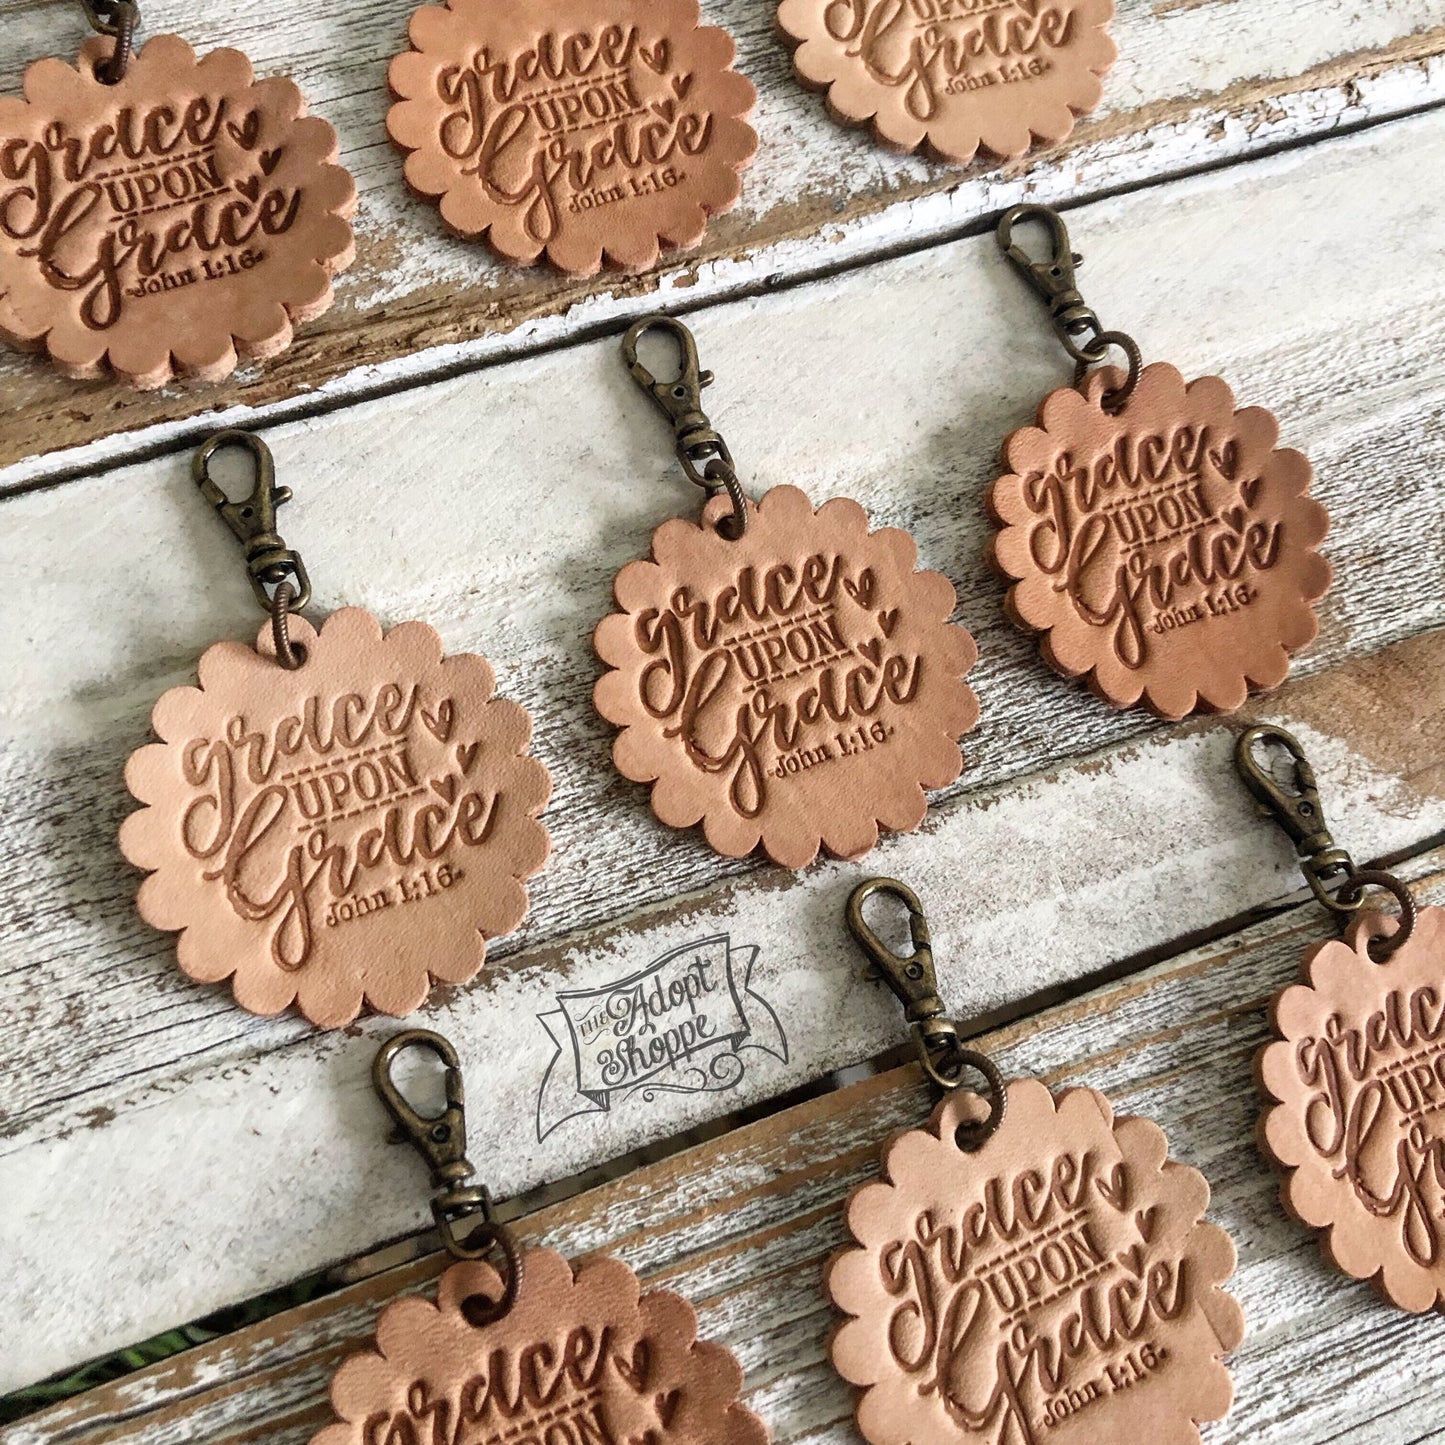 grace upon grace leather charm tag